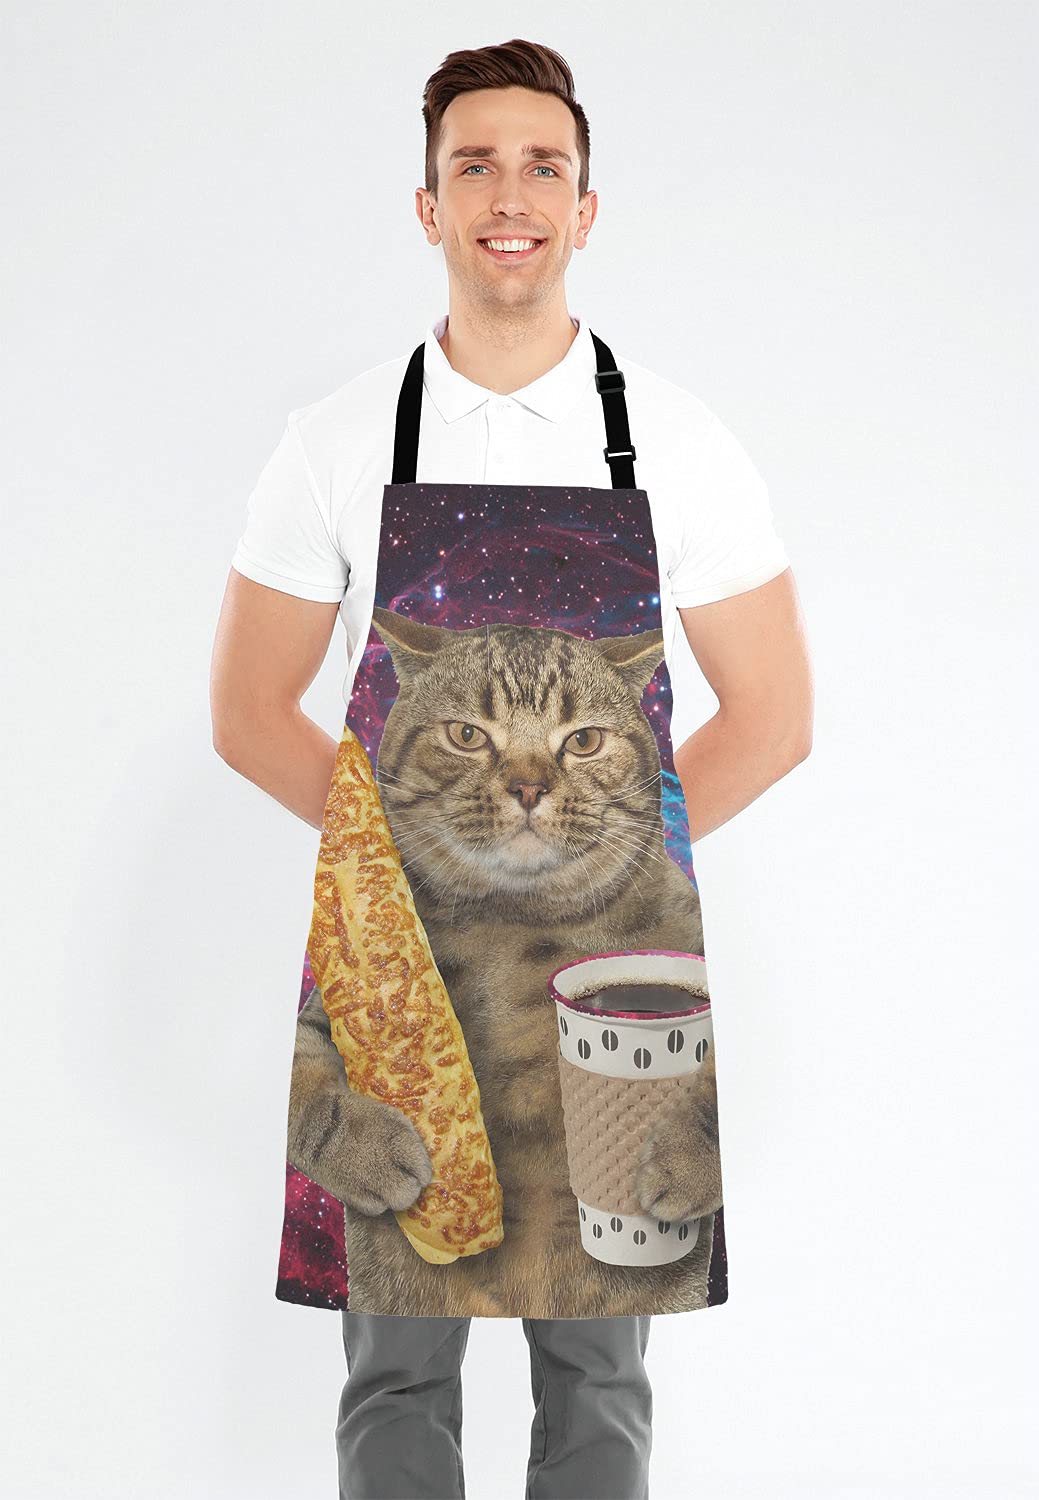 Lefolen Funny Galaxy Cat Adjustable Bib Apron, The cat is holding a cup of black coffee and a baguette Cooking Kitchen Apron for Men Women